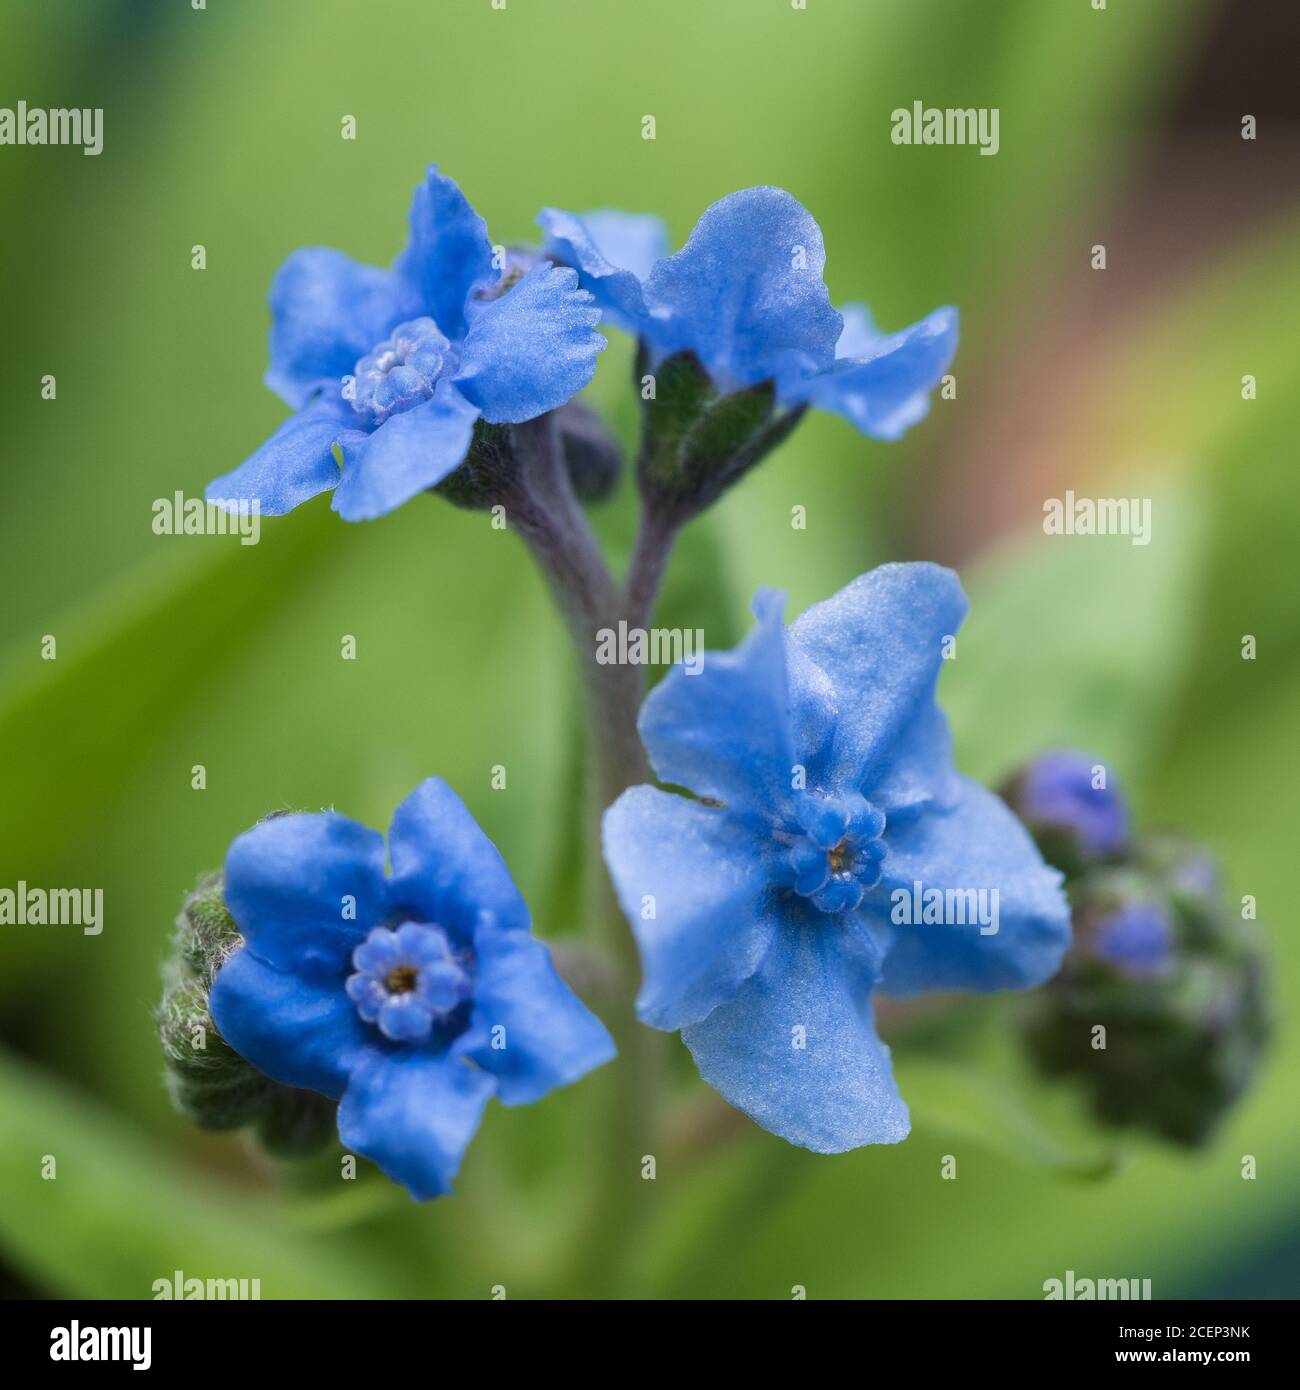 Chinese Forget-me-not, tiny  blue flowers, up close in an Australian coastal garden, blurred green background Stock Photo